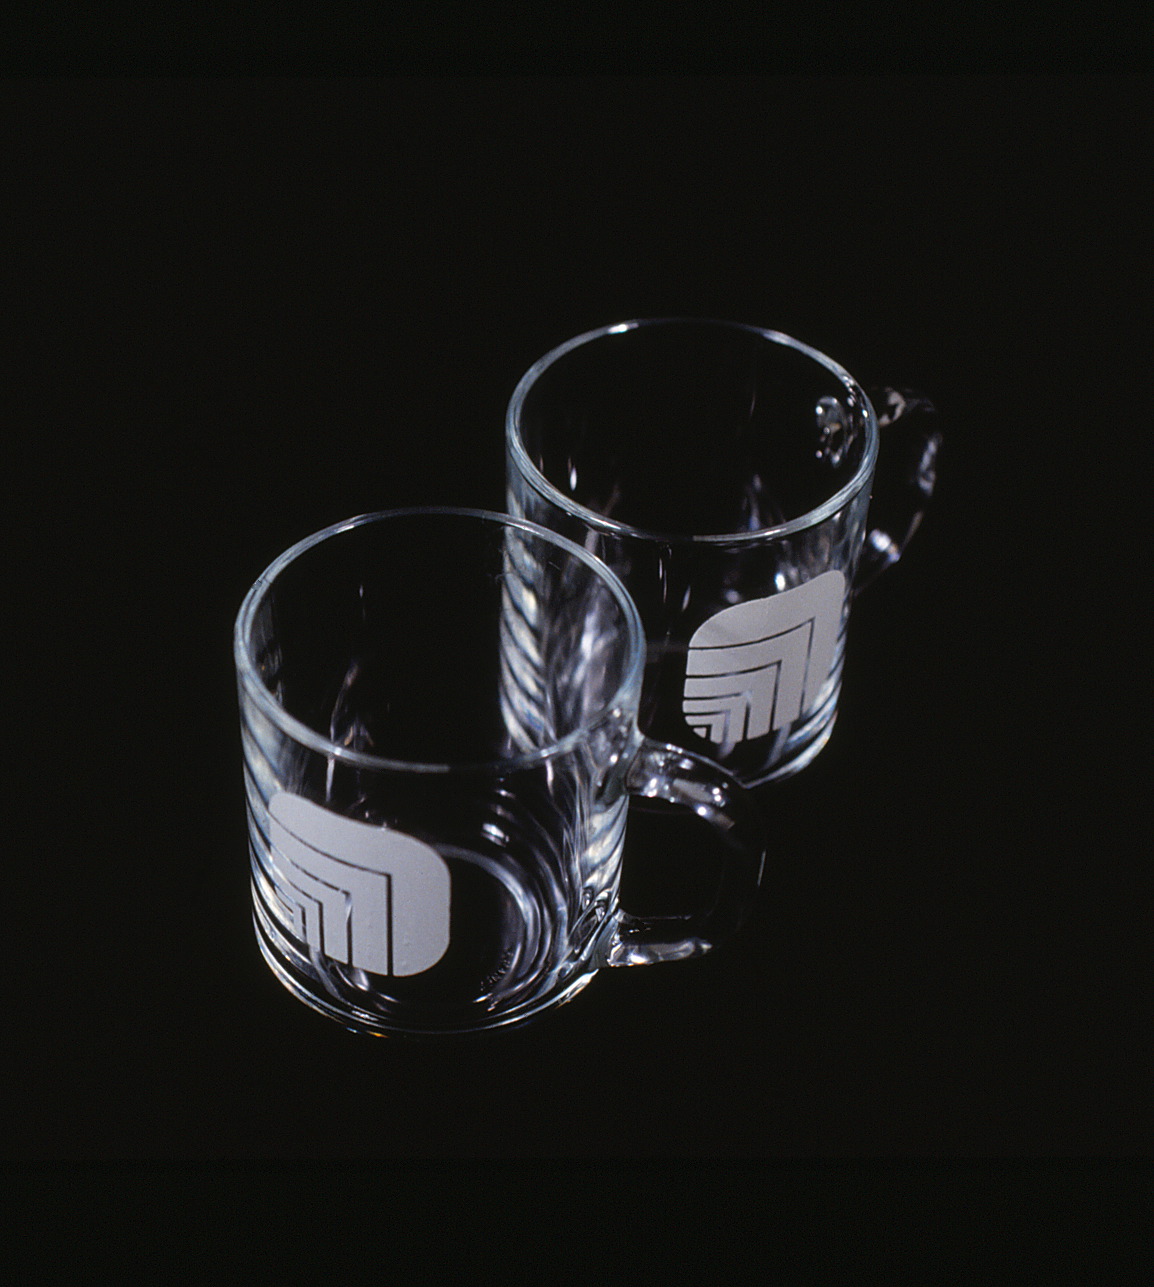 Pair of glass coffee mugs with Oxford logos.